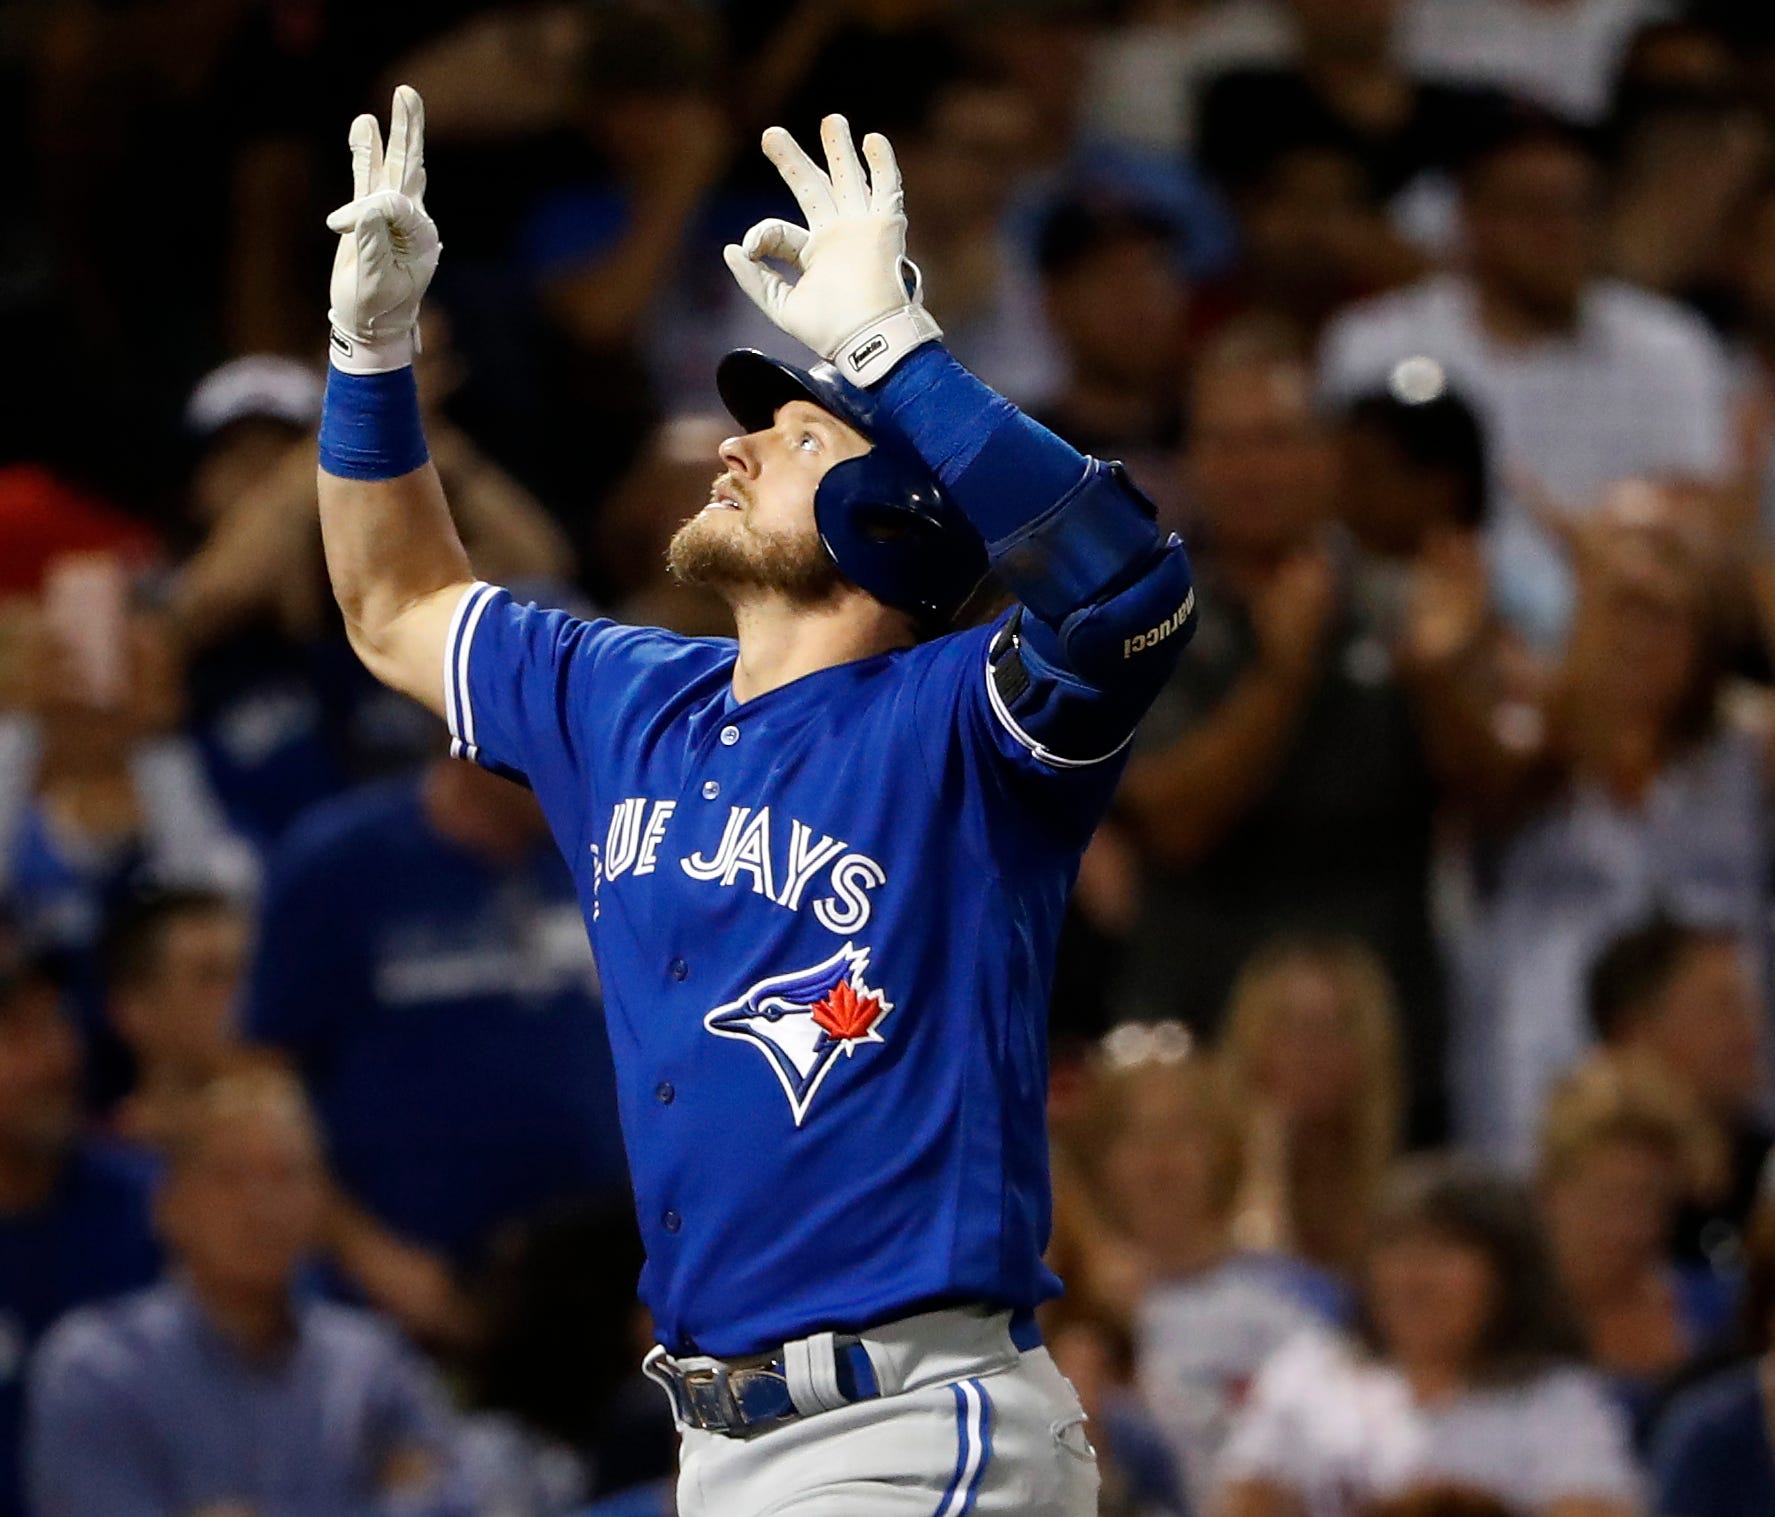 Josh Donaldson is a three-time All-Star and the 2015 AL MVP.